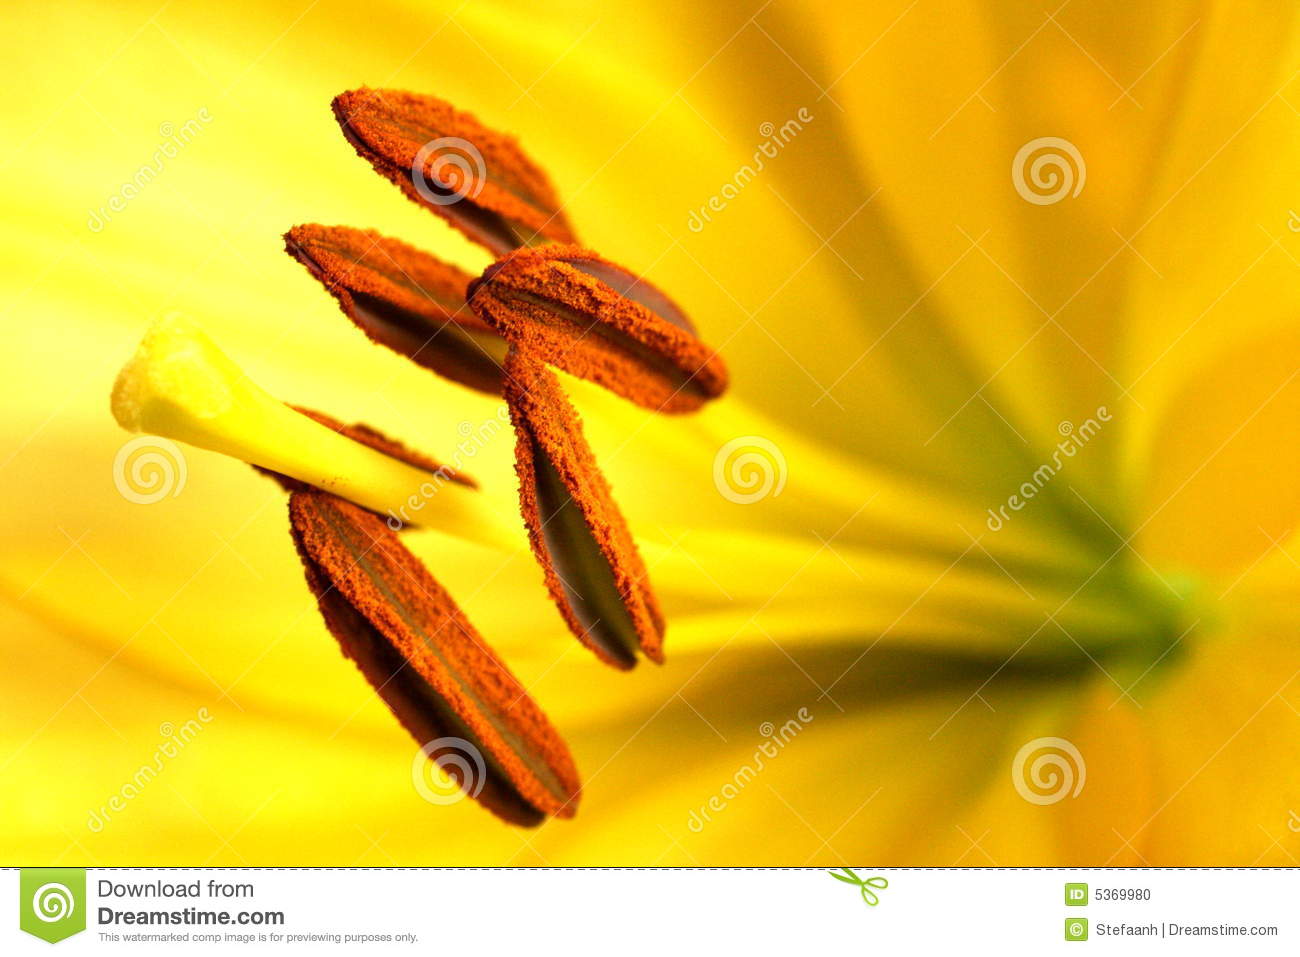 Related Image To Flower Parts Anther